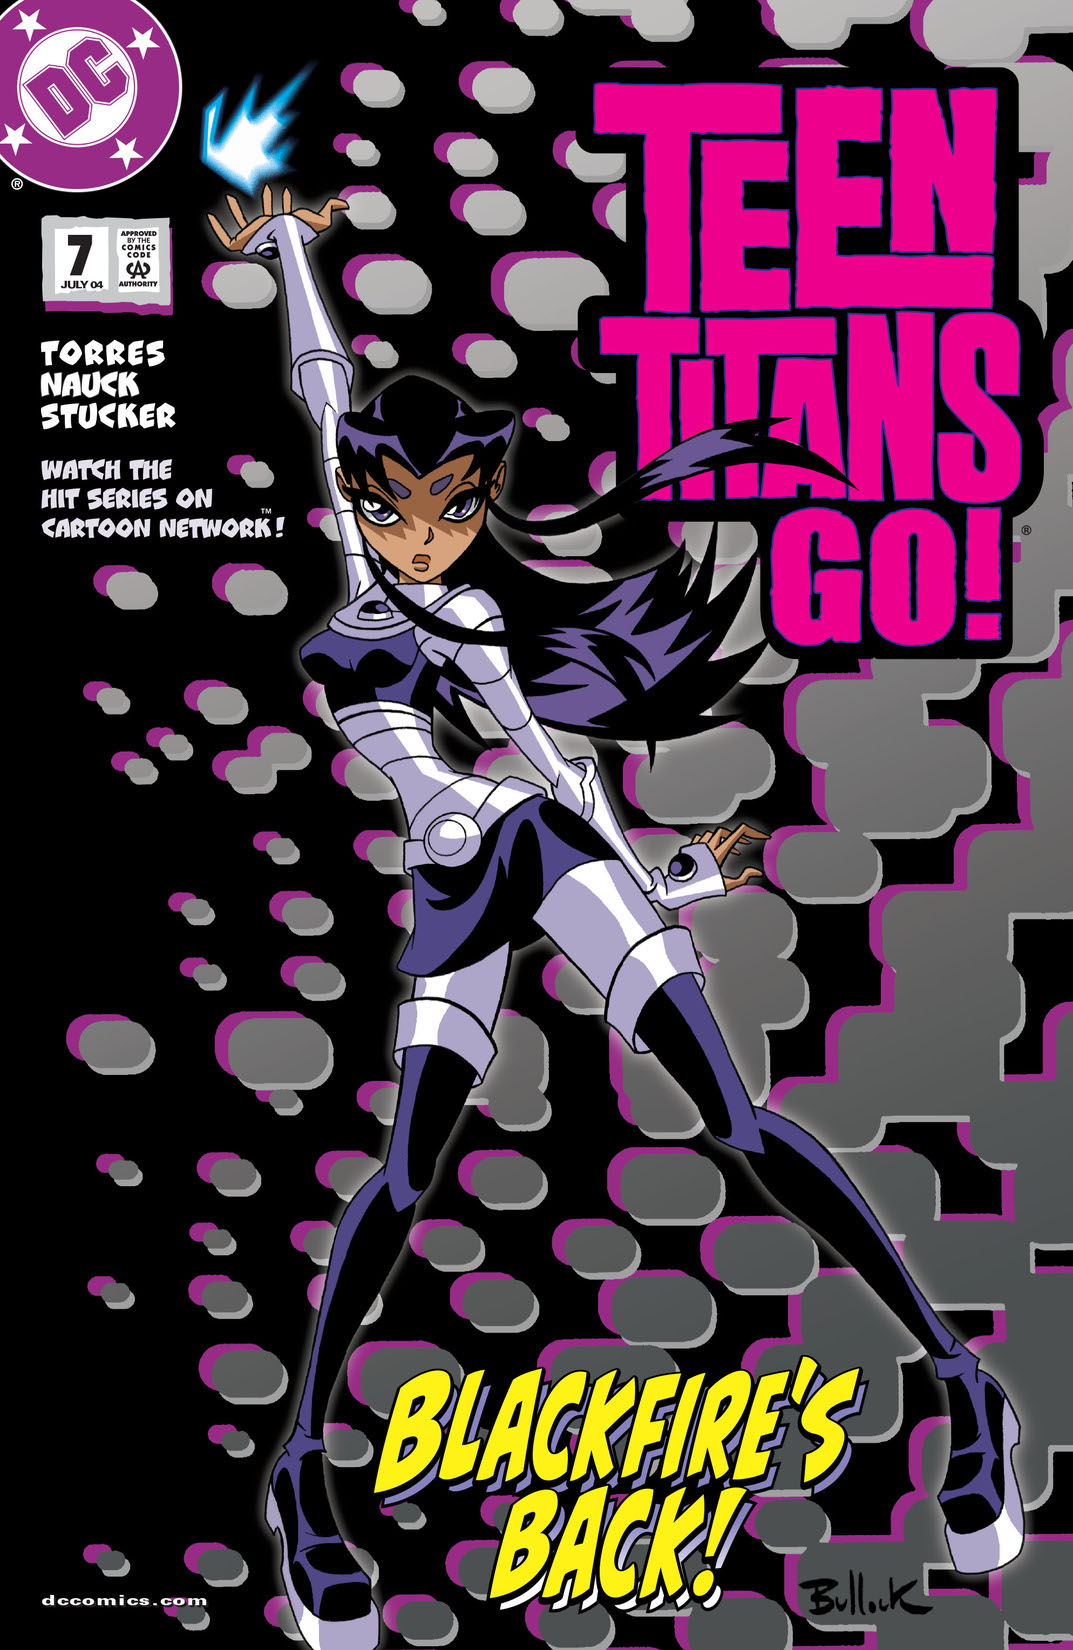 Teen Titans Go! (2003-) #7 preview images